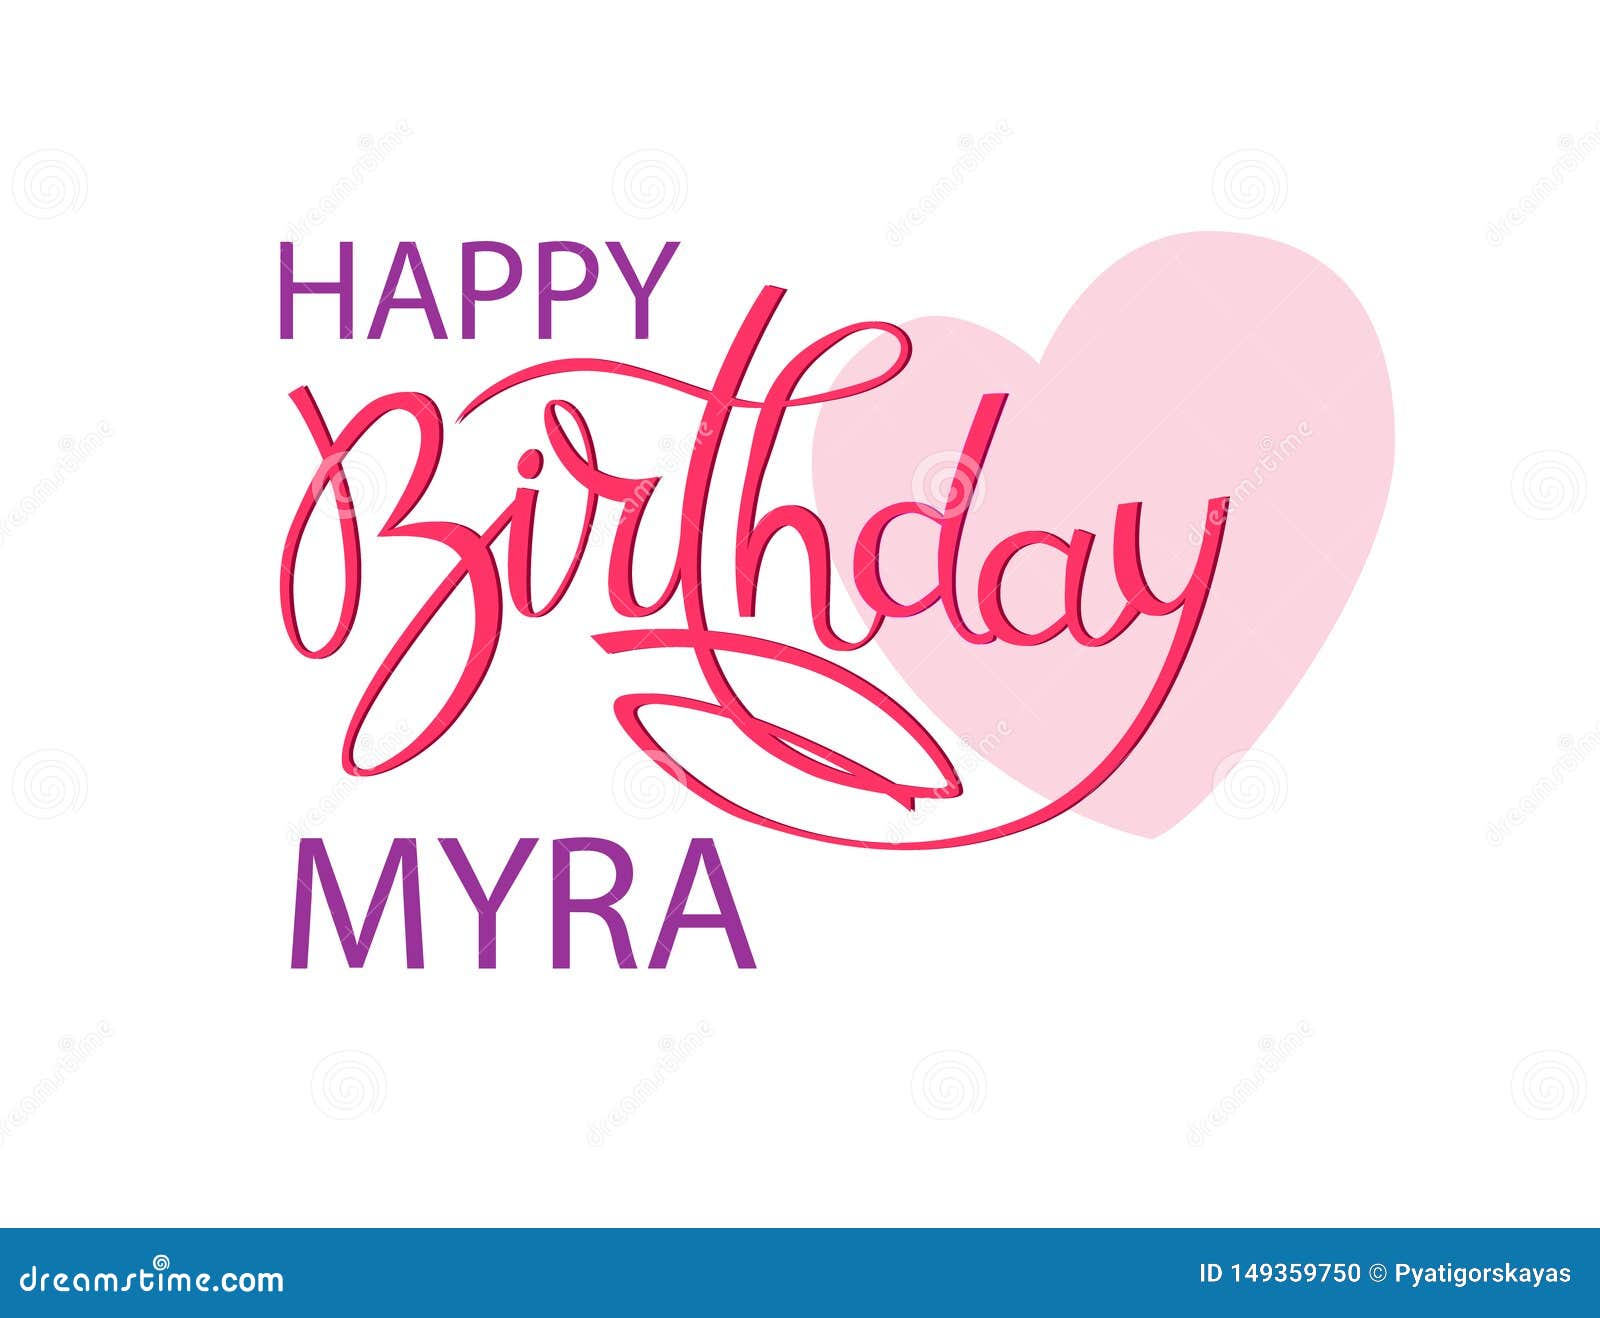 Birthday Greeting Card with Indian Name Myra. Elegant Hand Lettering and a  Big Pink Heart Stock Vector - Illustration of gratz, elegant: 149359750